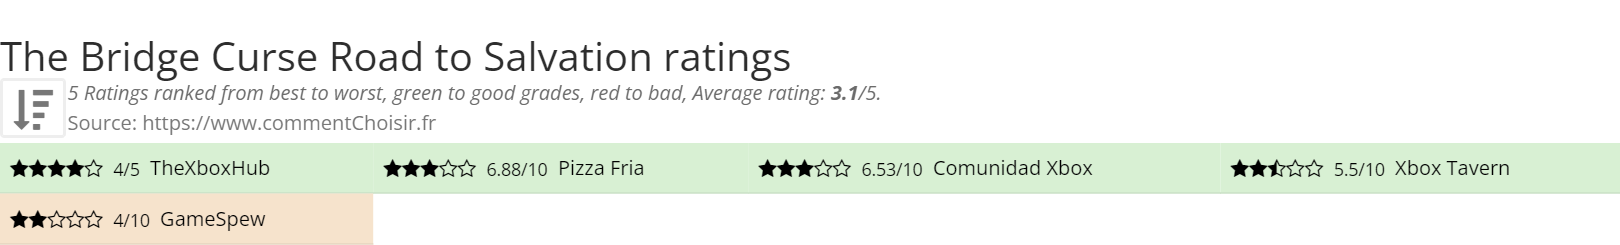 Ratings The Bridge Curse Road to Salvation